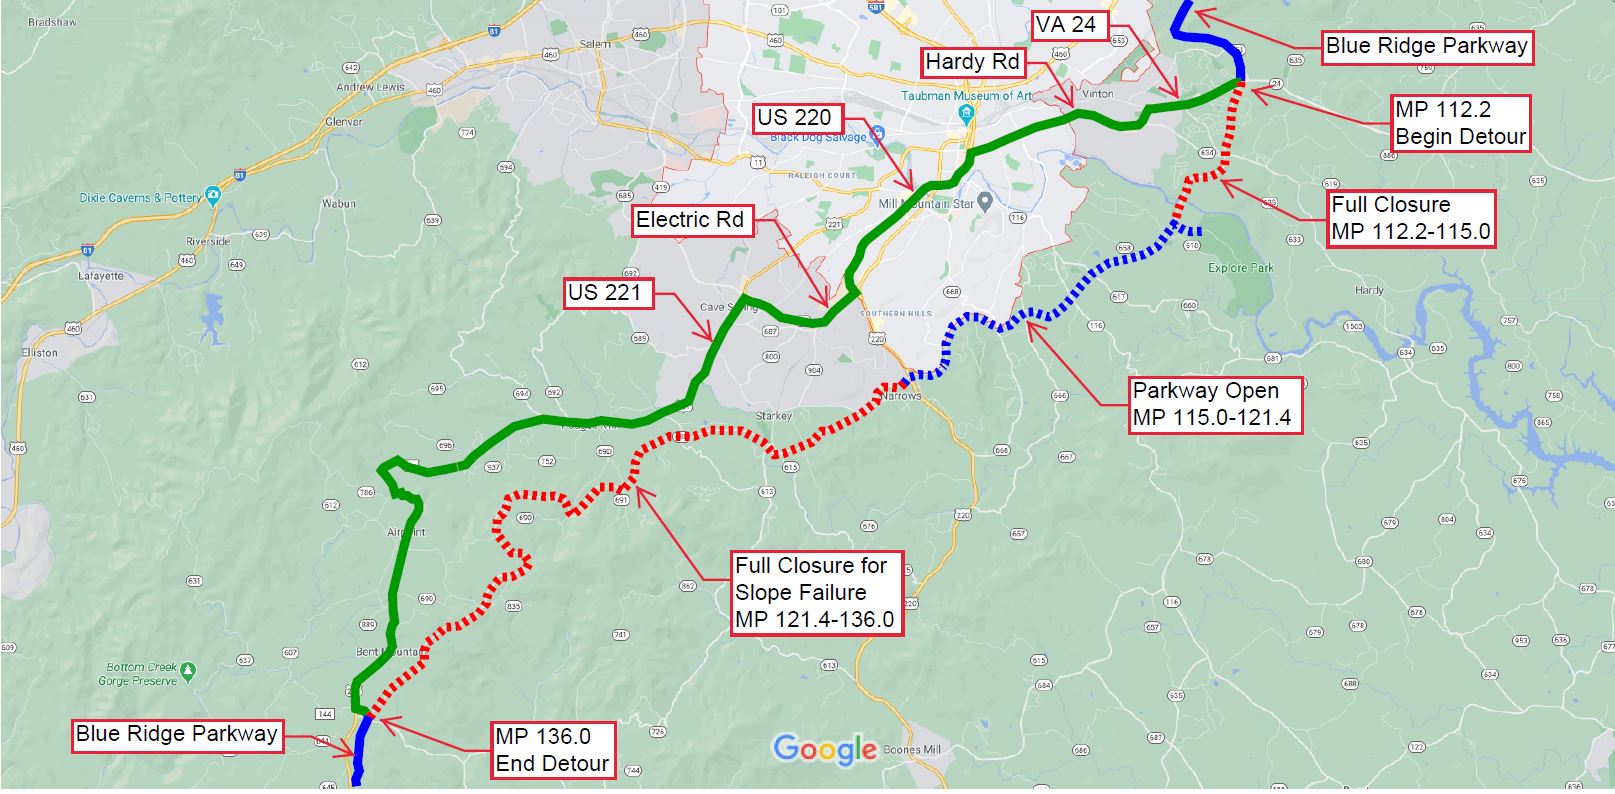 Map showing detour around Roanoke River Bridge construction closure due to closures from Milepost 112 to Milepost 136 on the Parkway. Shown as a solid greed line, this detour will be in place from VA Route 24 at Washington Ave. to Adney Gap at US 221.  